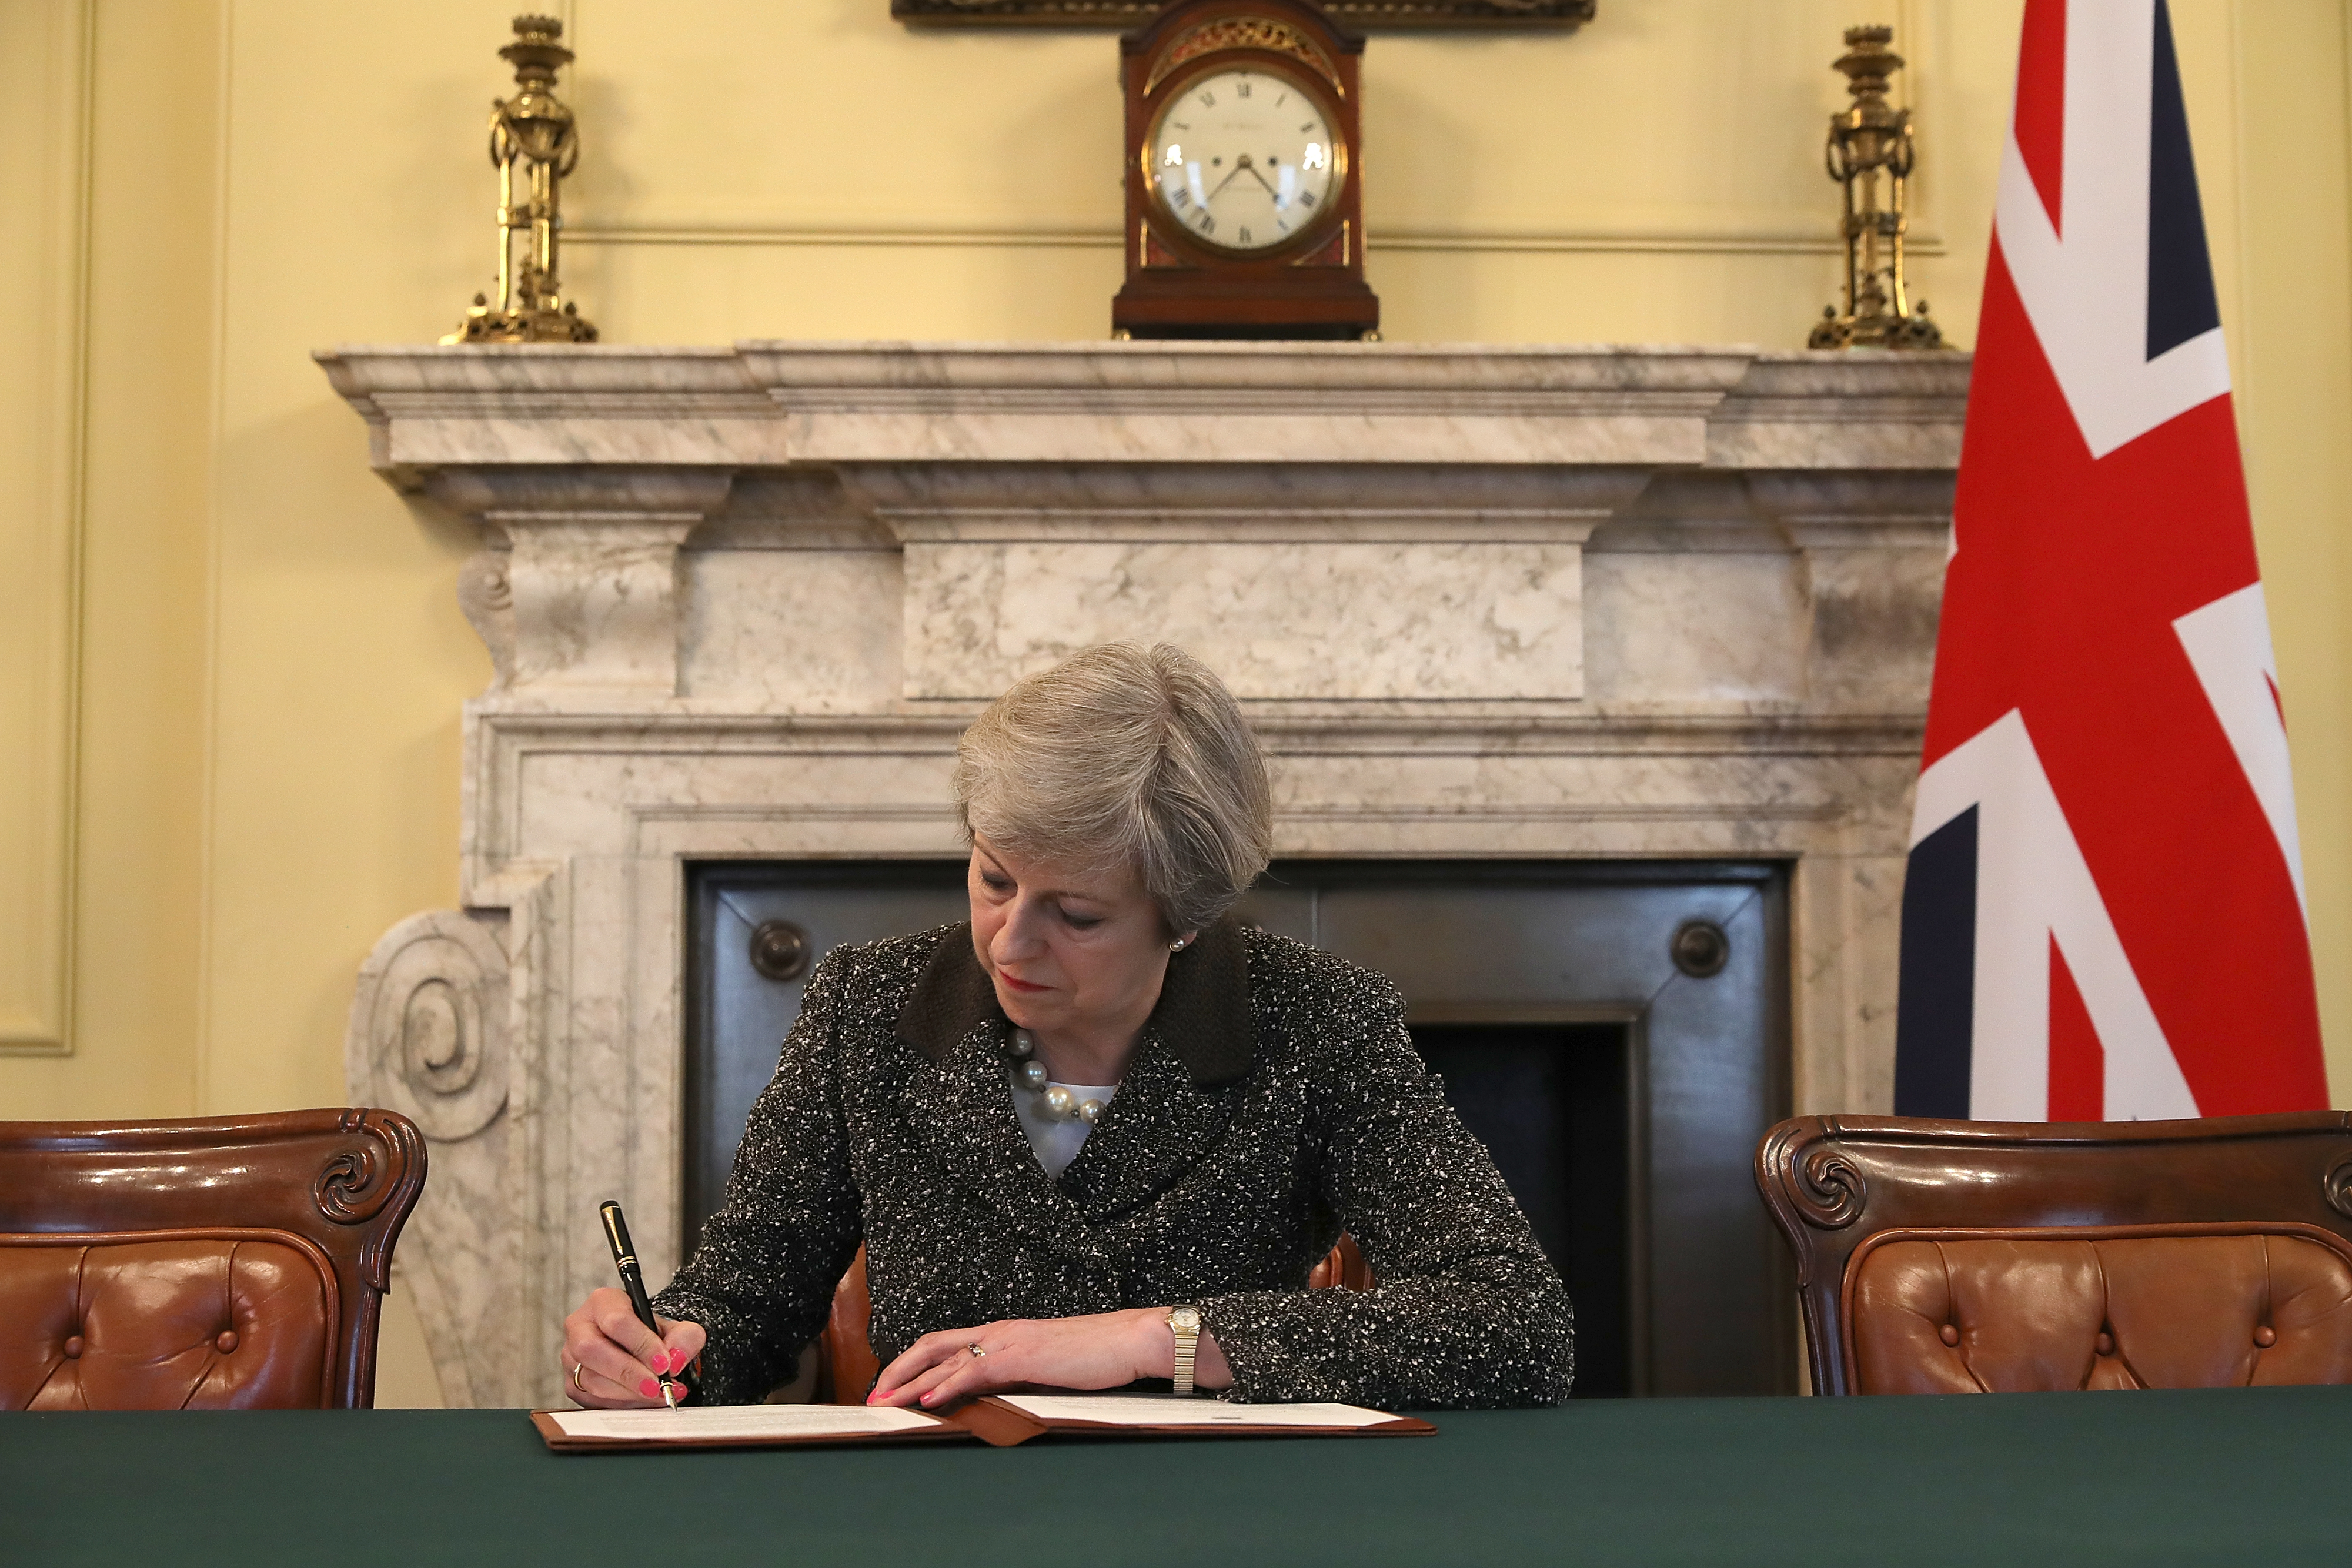 British Prime Minister Theresa May signs the official letter invoking Article 50 and the U.K.'s intention to leave the E.U. on March 28, 2017 in London. (Christopher Furlong—Getty Images)